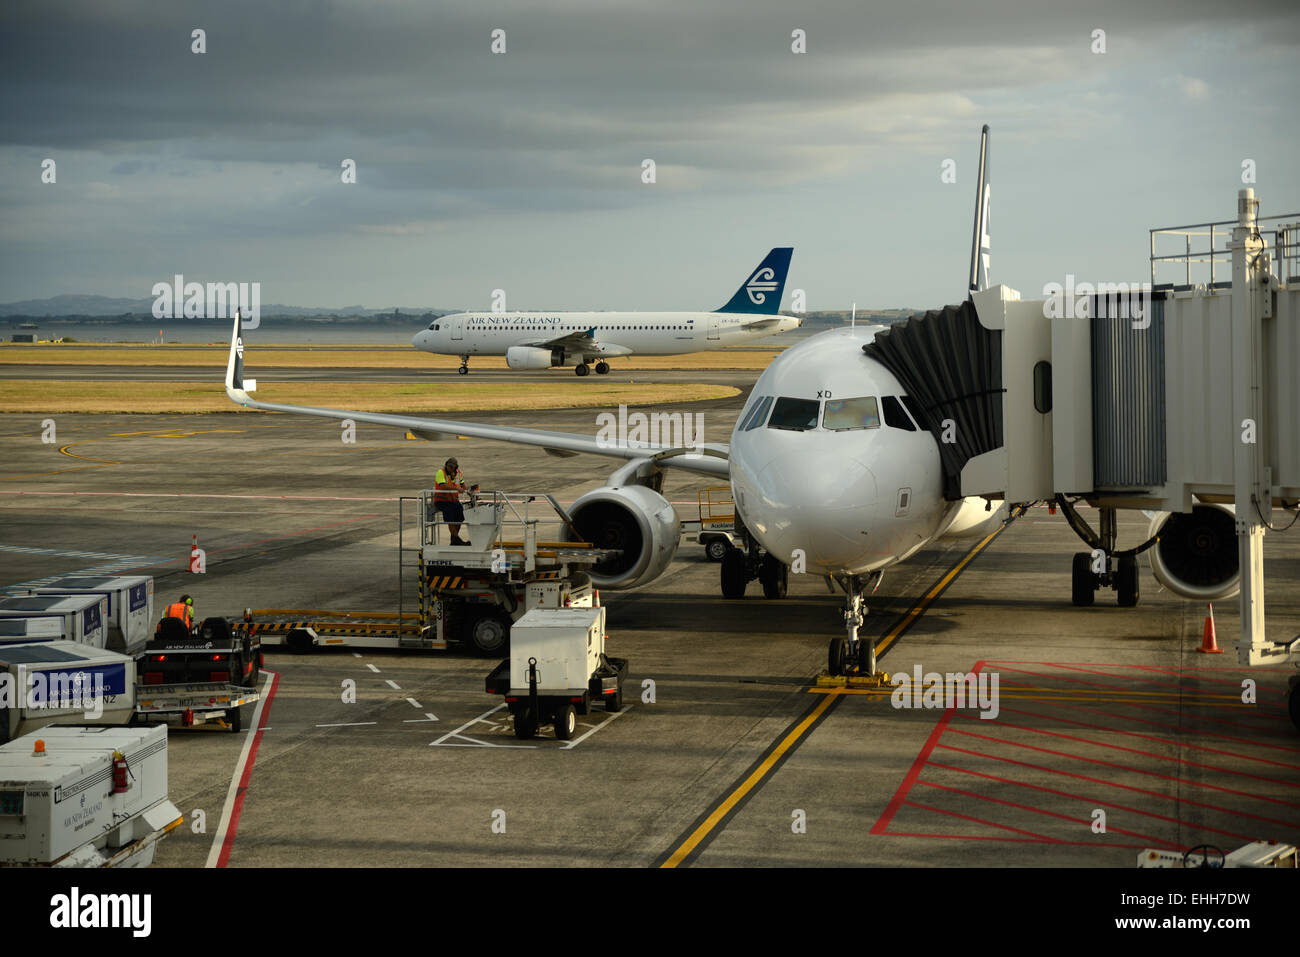 AUCKLAND, NEW ZEALAND, JANUARY 23, 2015: An Air New Zealand jet lands at Auckland Airport while another takes on passengers Stock Photo